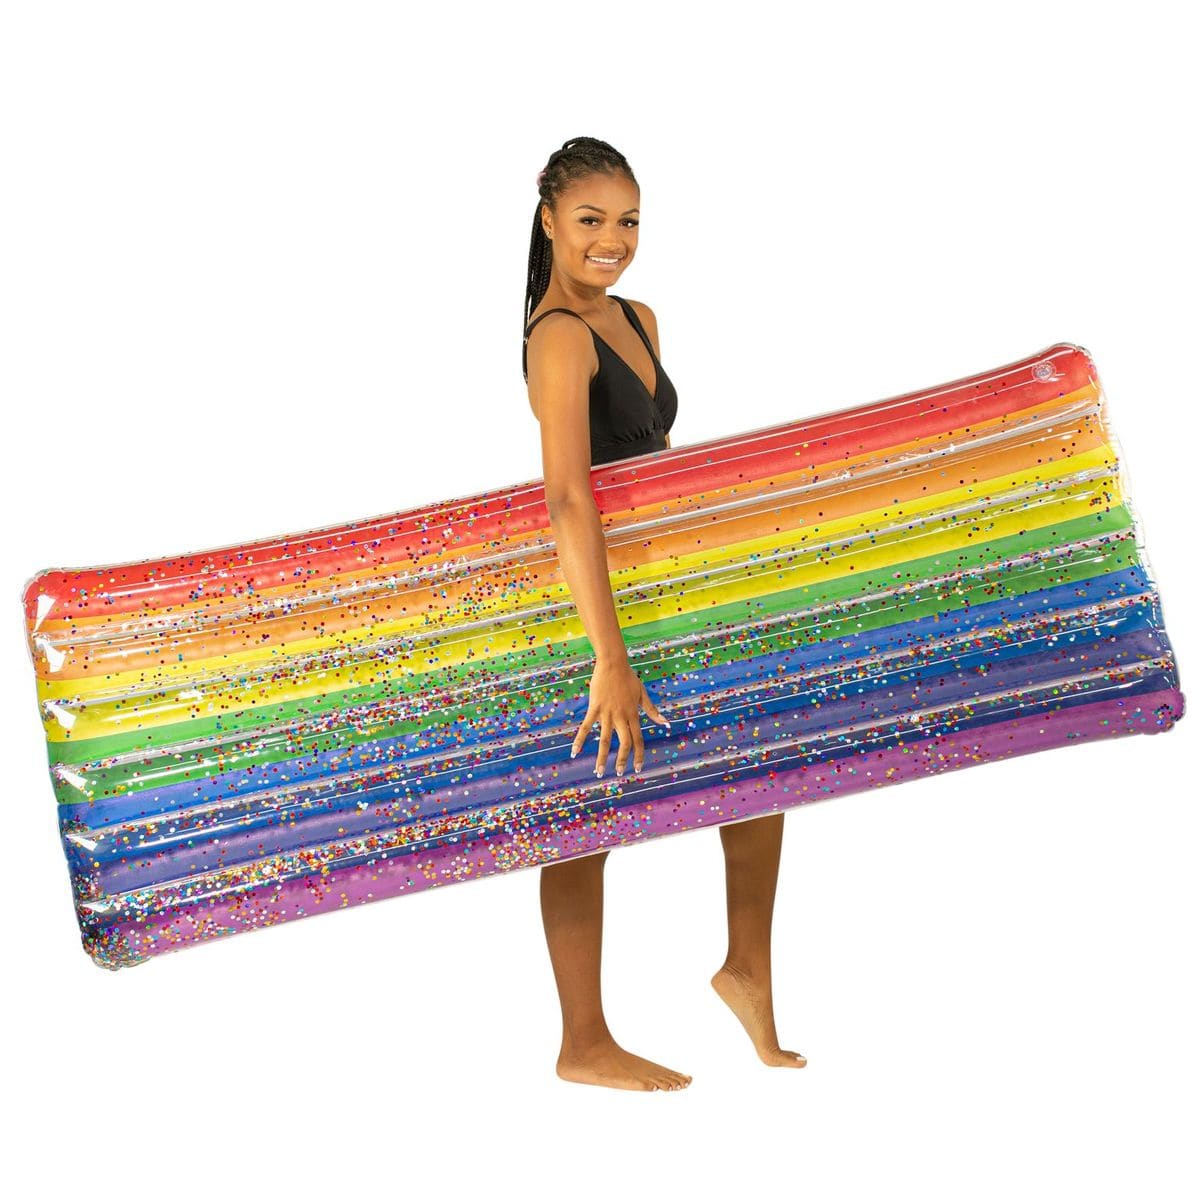 Inflatable Rainbow Pool Raft Deluxe Large Size